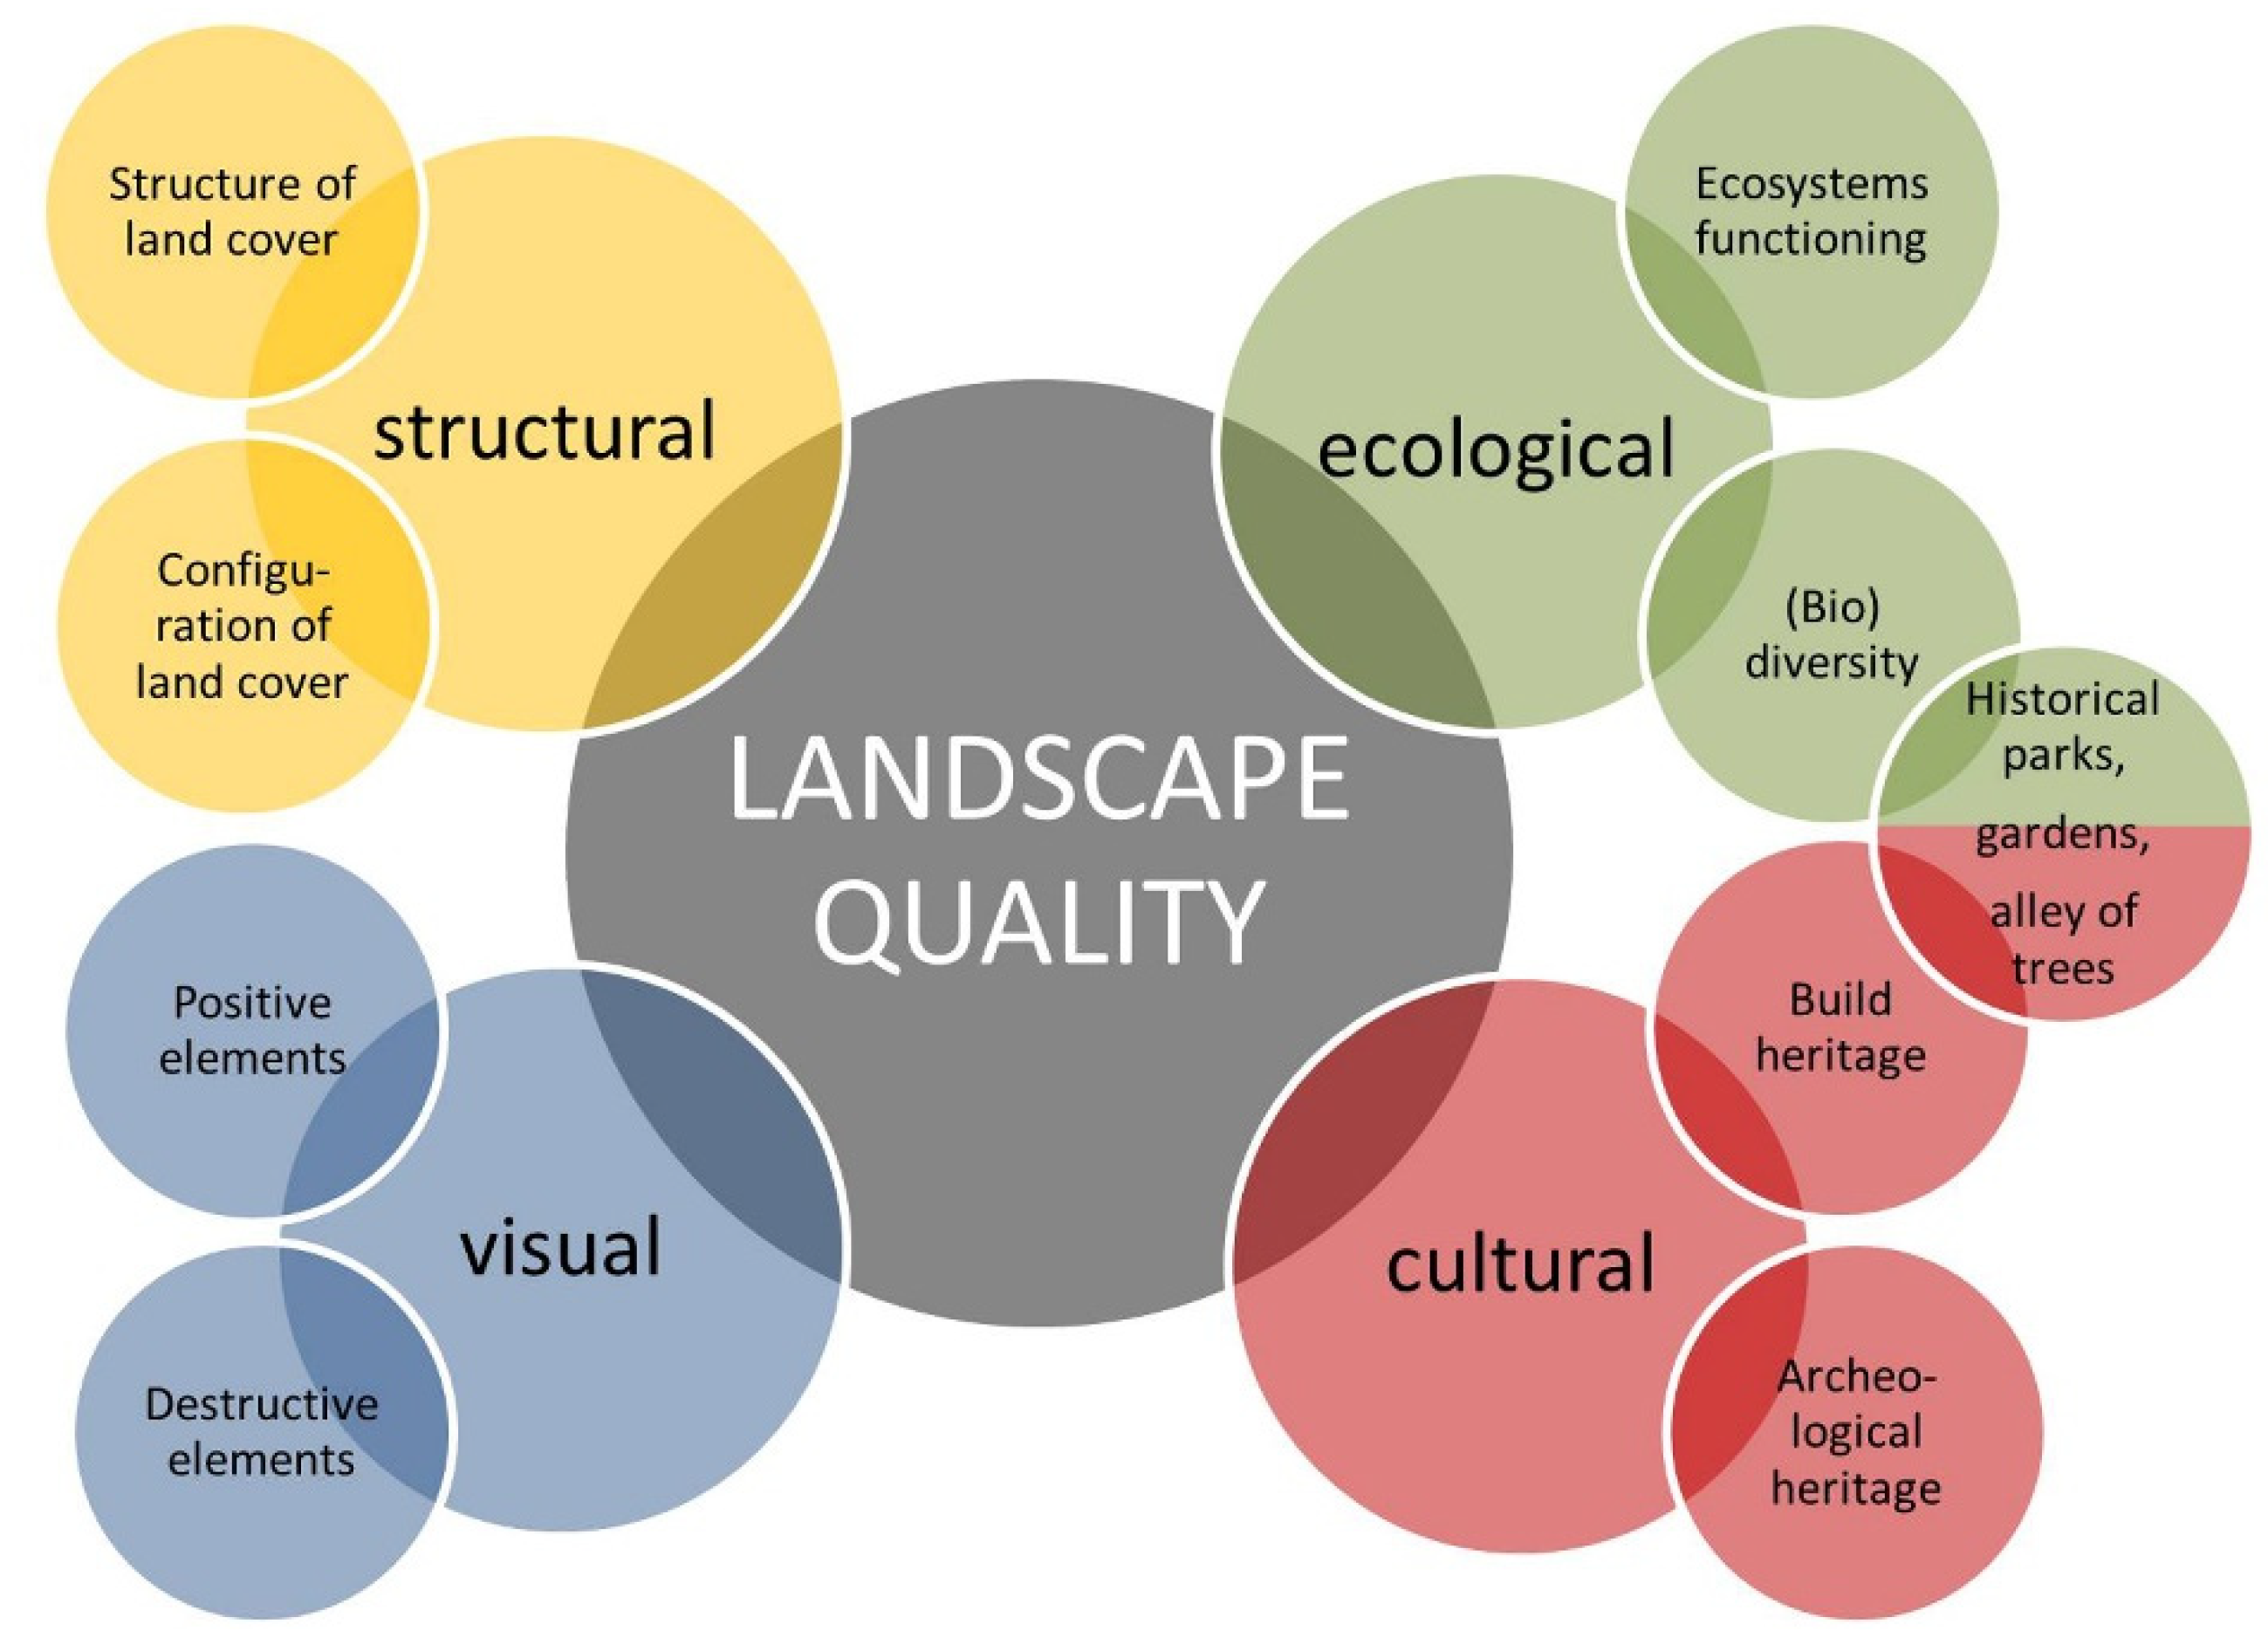 what is landscape analysis in research